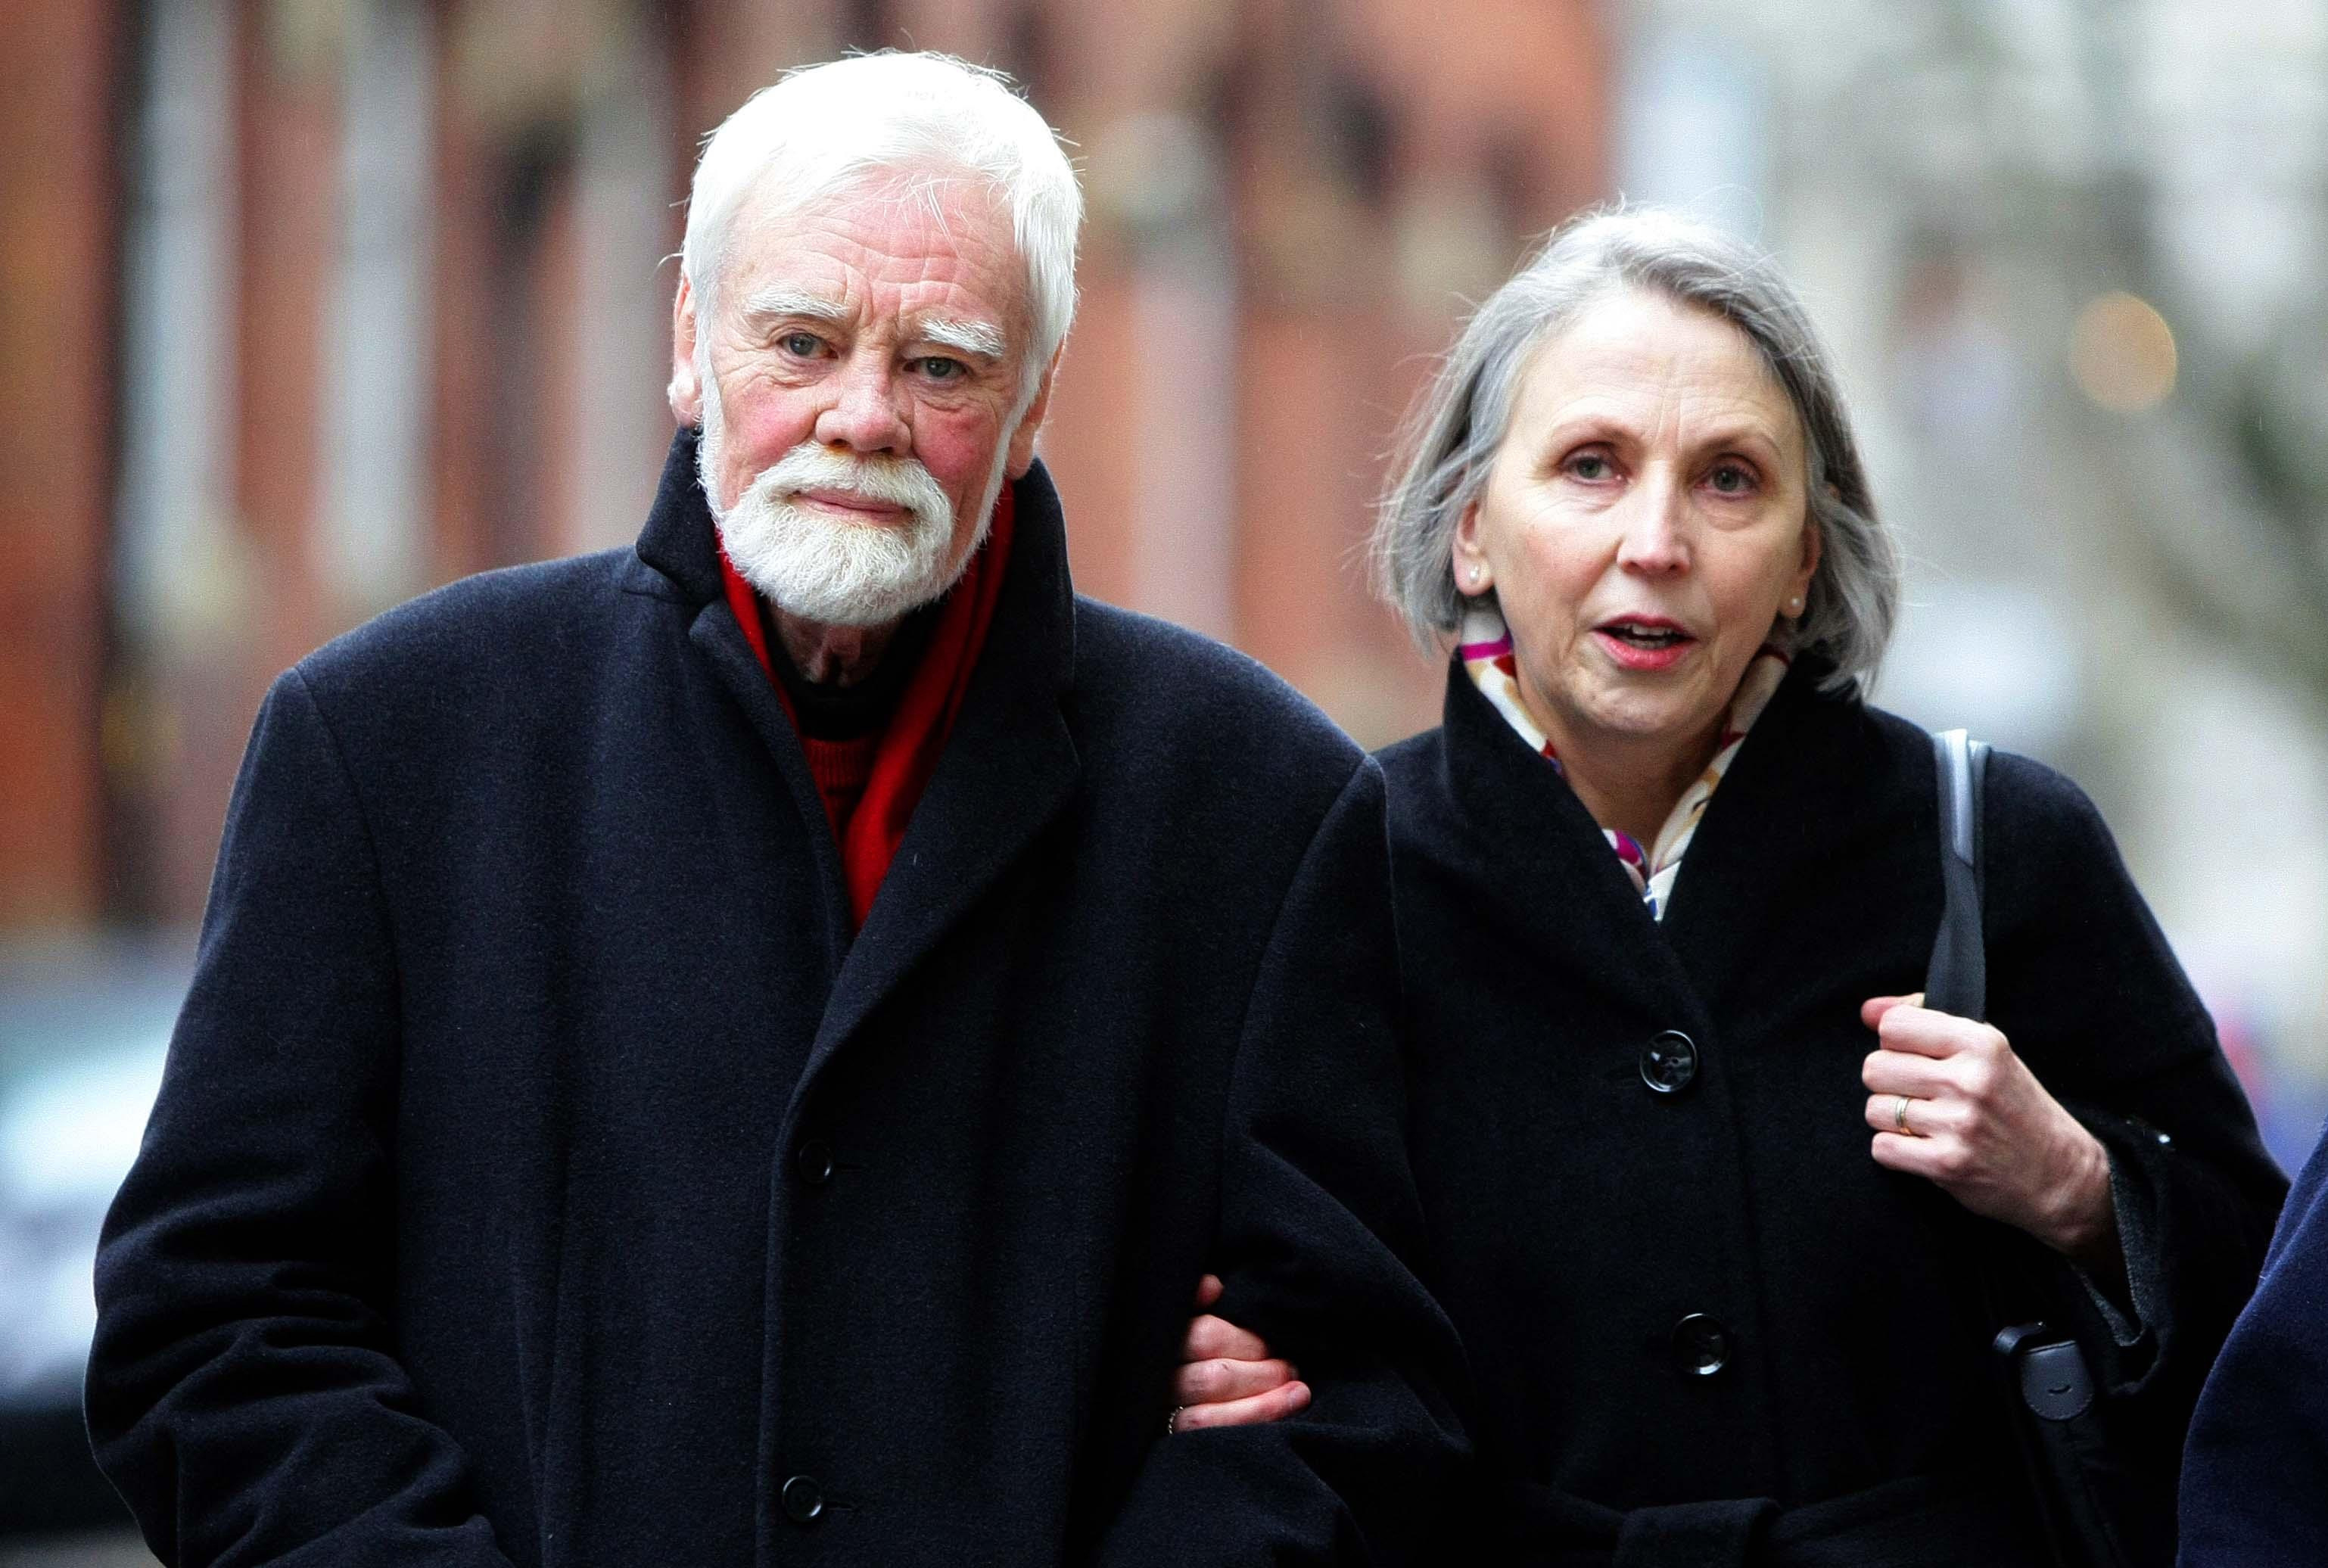 Tony Booth and his wife Steph. The actor and political campaigner, who starred in Till Death Us Do Part, has died, his family said in a statement. (Peter Byrne/PA Wire)